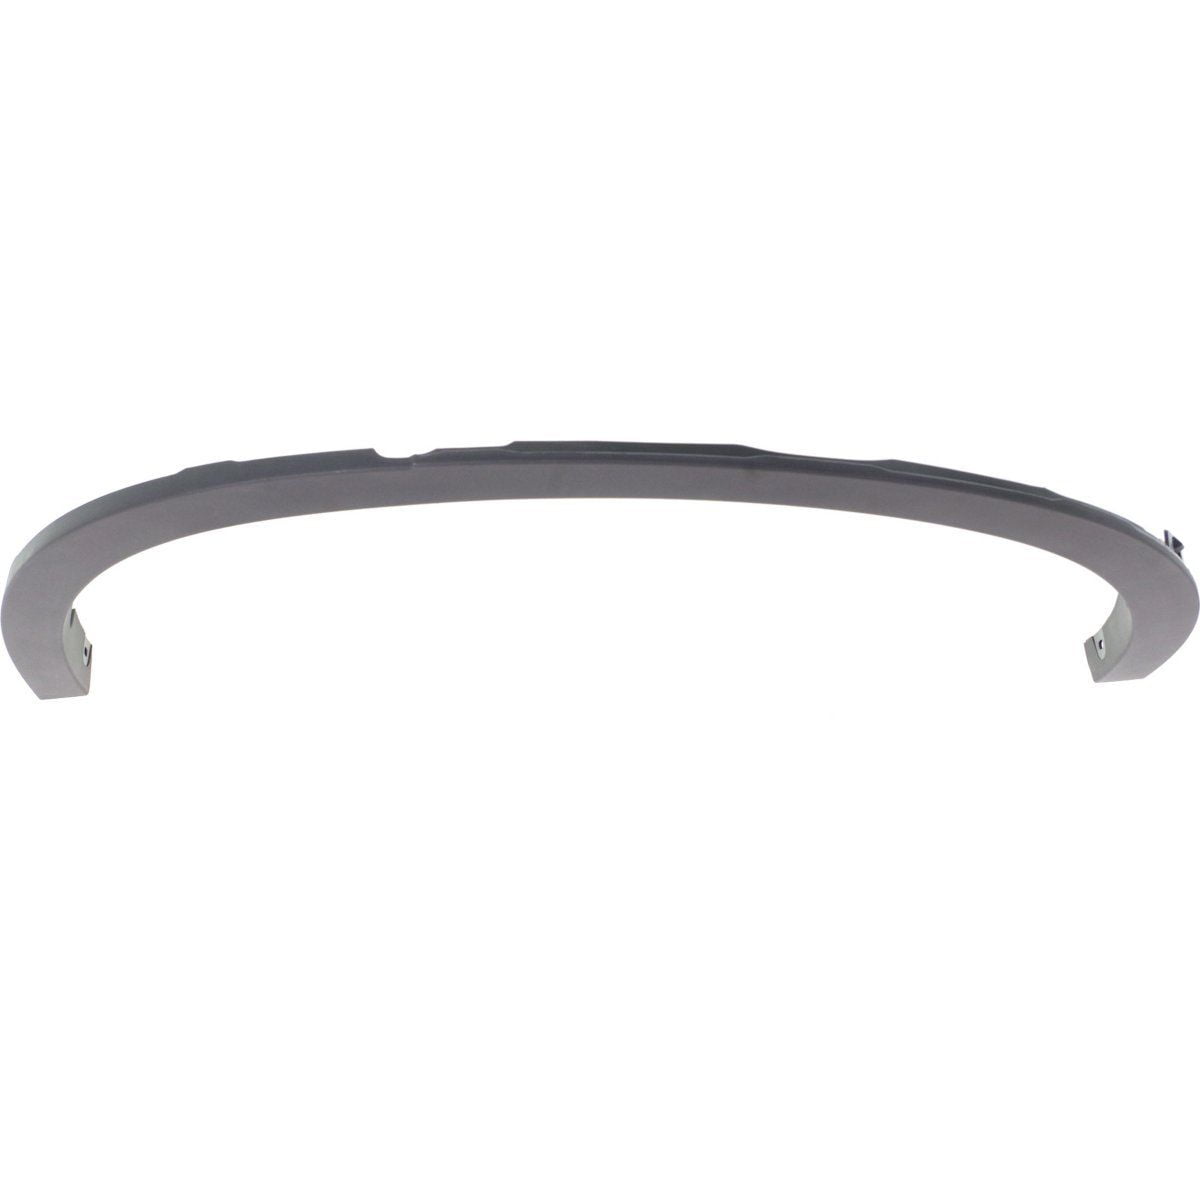 NEW WHEEL OPENING MOLDING REAR LEFT SIDE FITS 2014-2018 BMW X5 ...